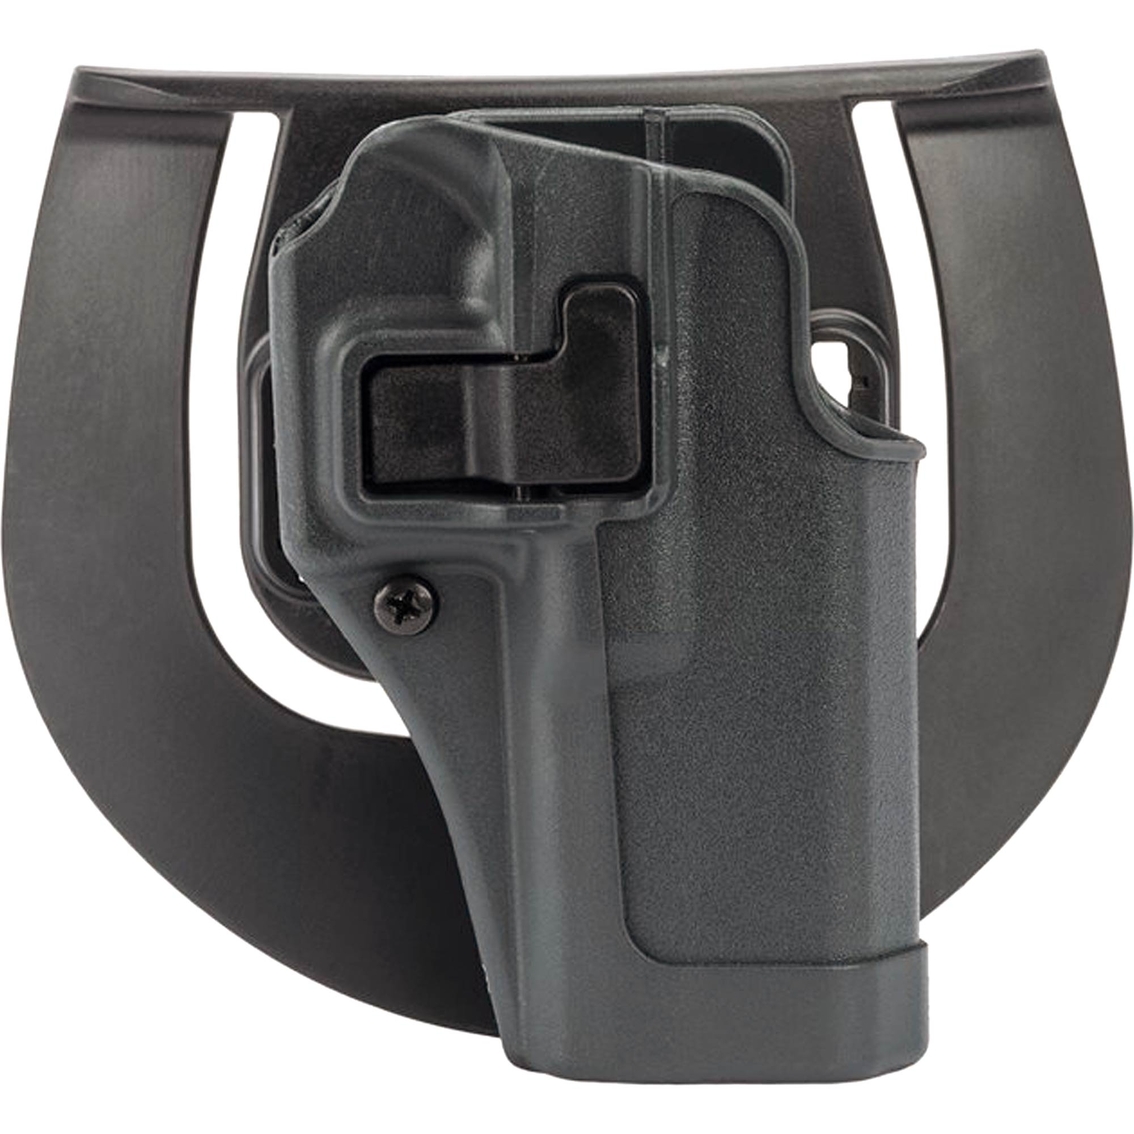 Holster fits GLOCK 20 21 37 